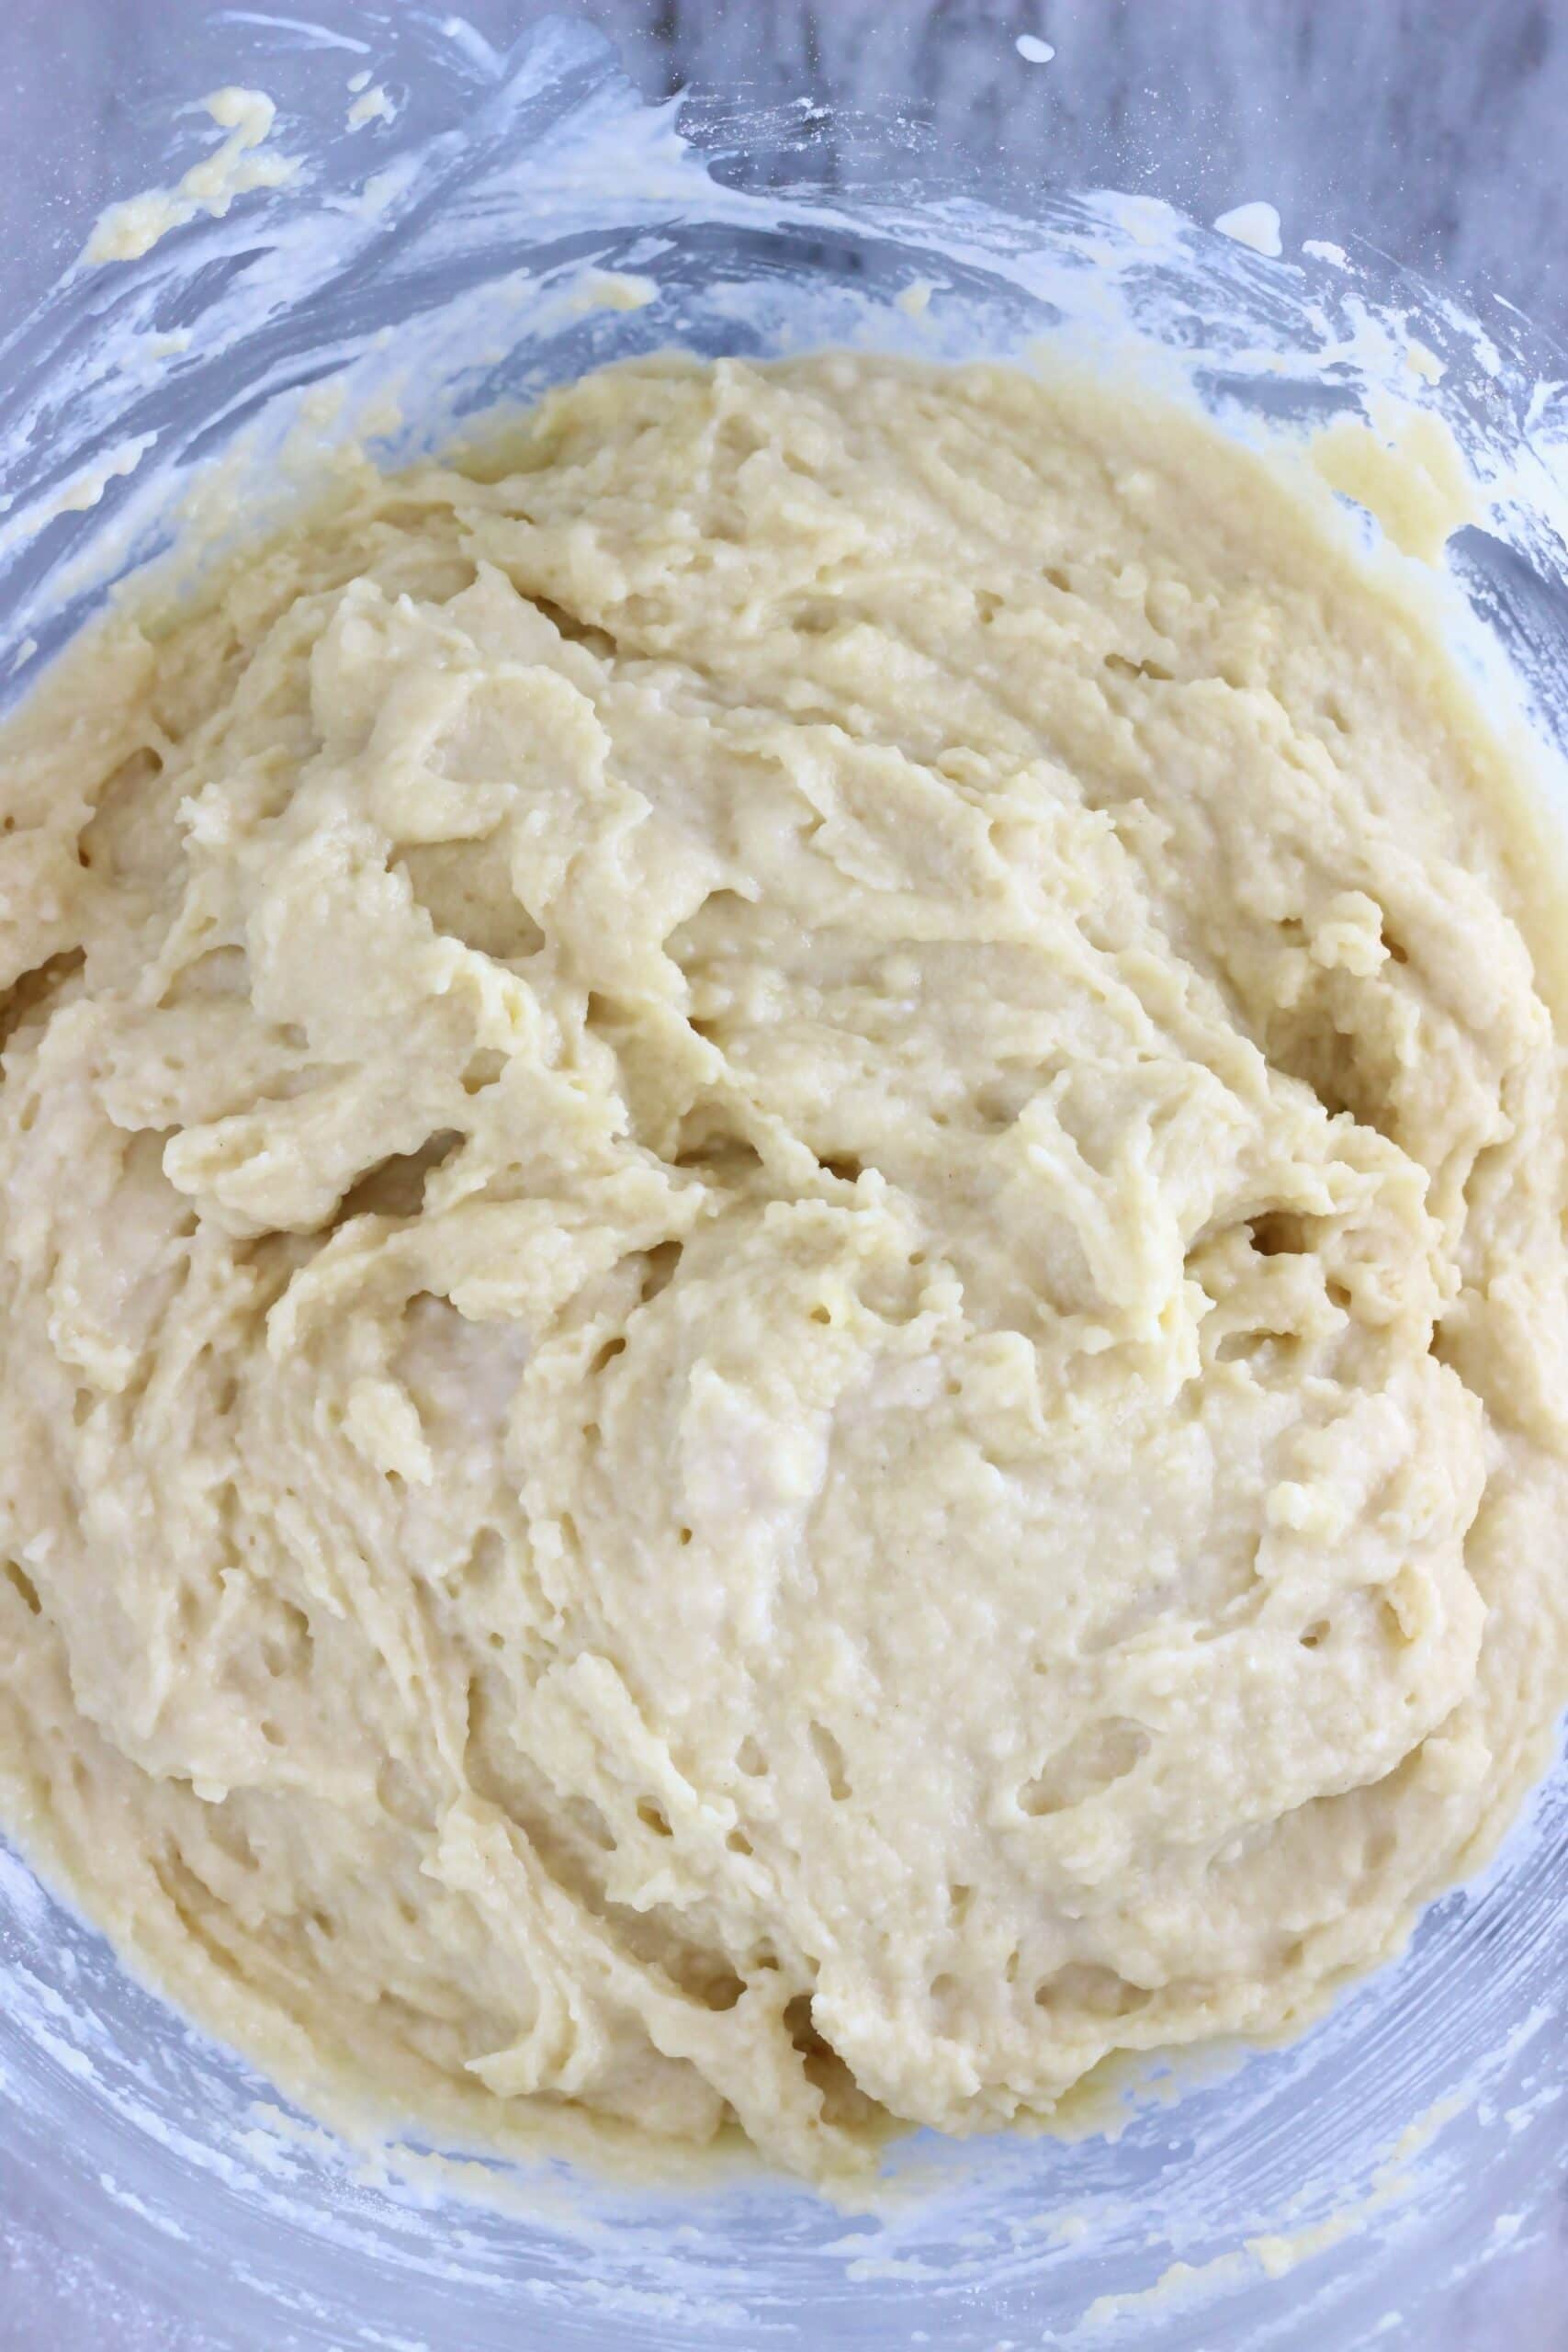 Raw gluten-free vegan olive oil cake batter in a glass mixing bowl